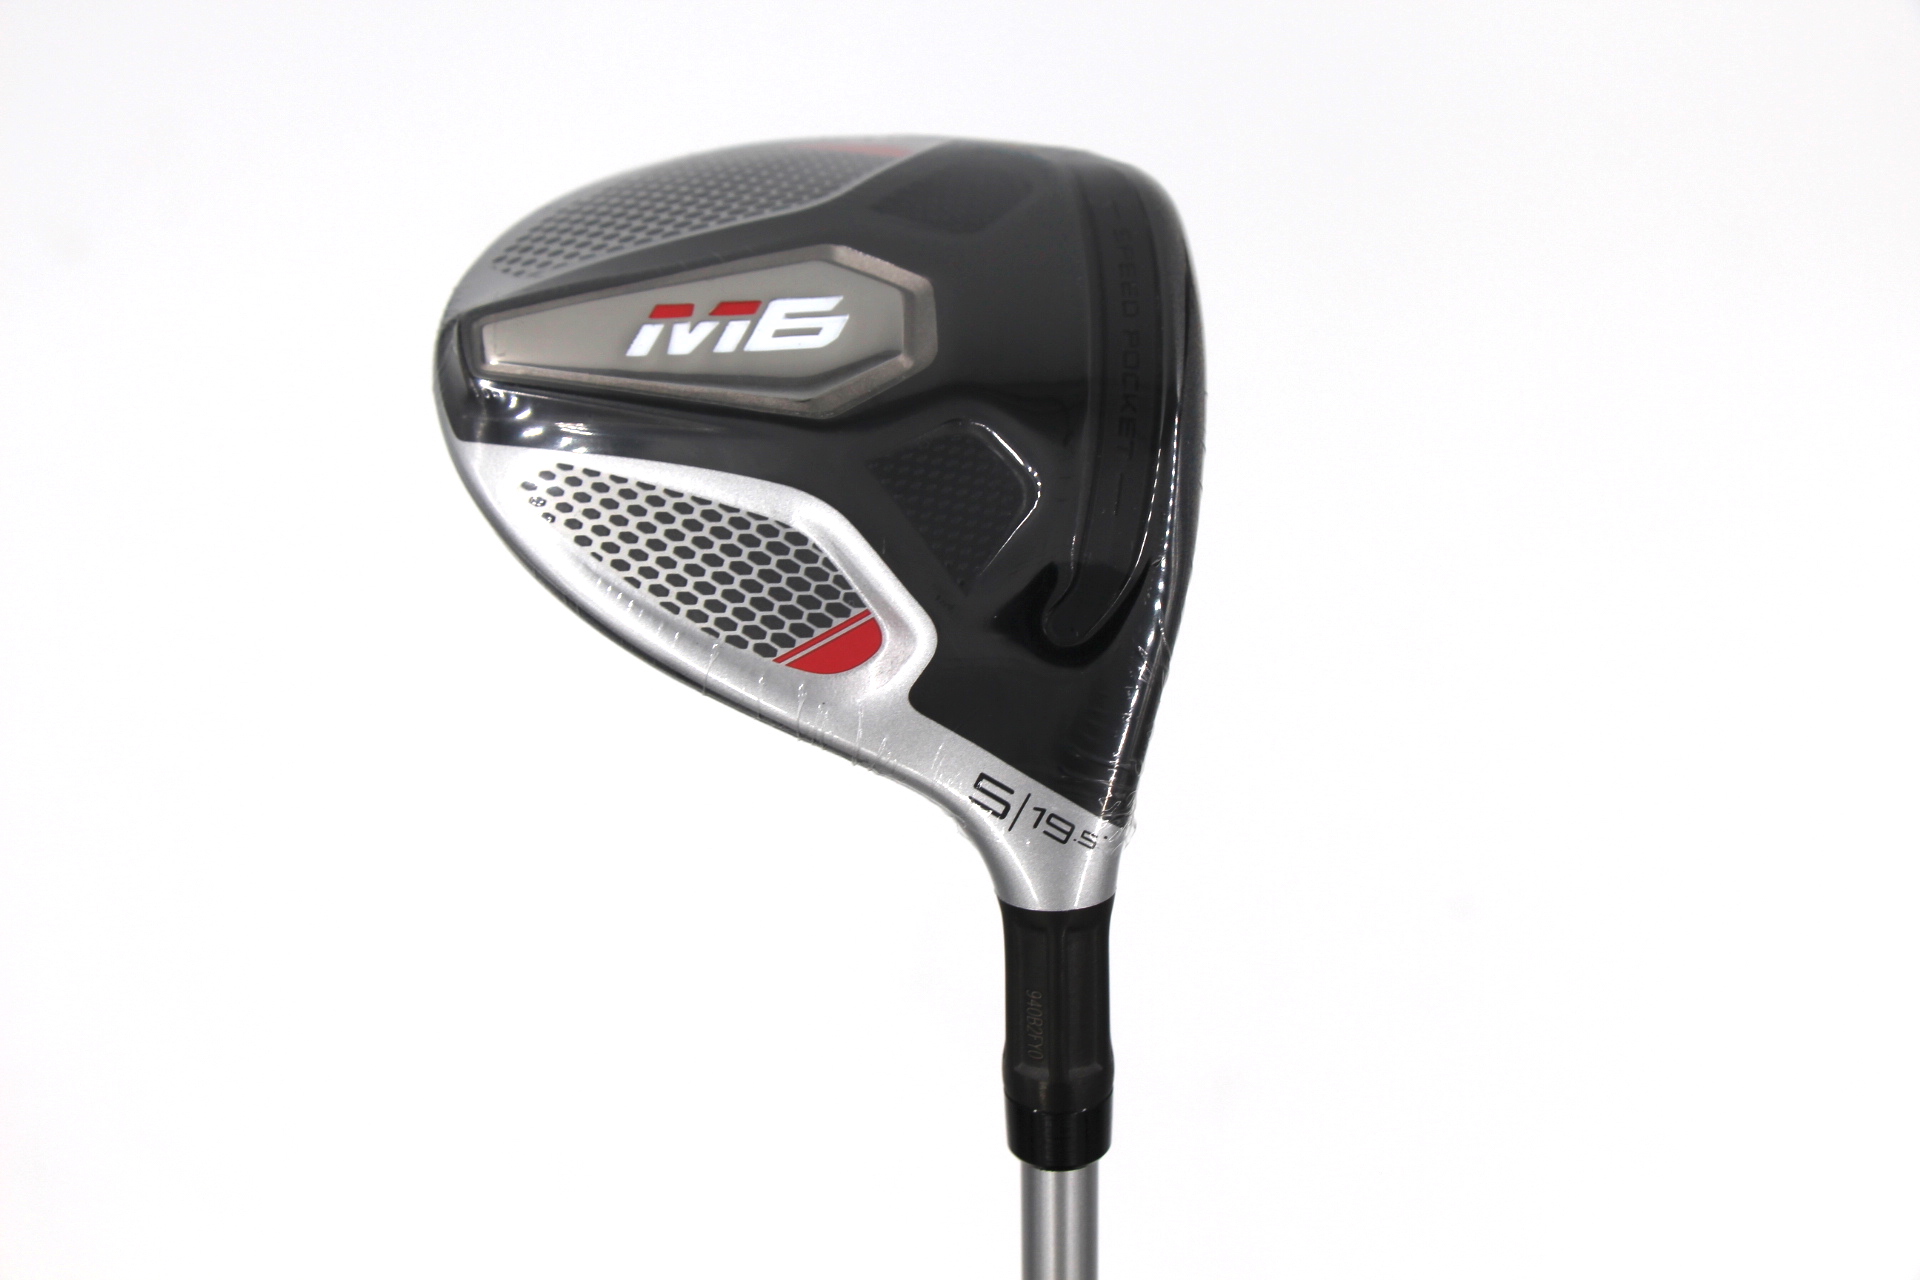 TaylorMade M6 5-wood